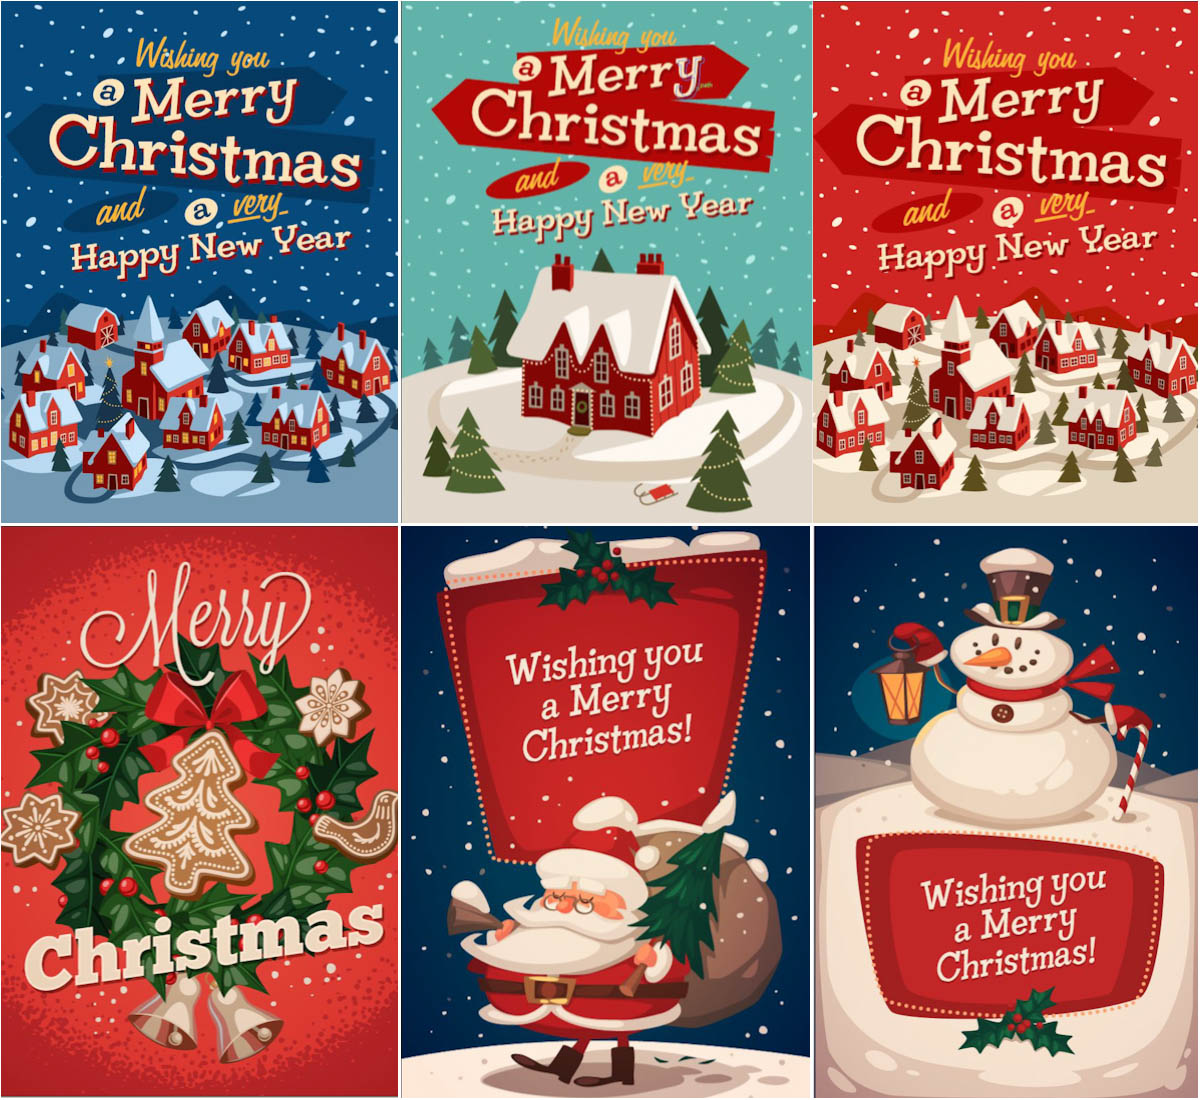 2014 Happy New Year and Merry Christmas cards vector